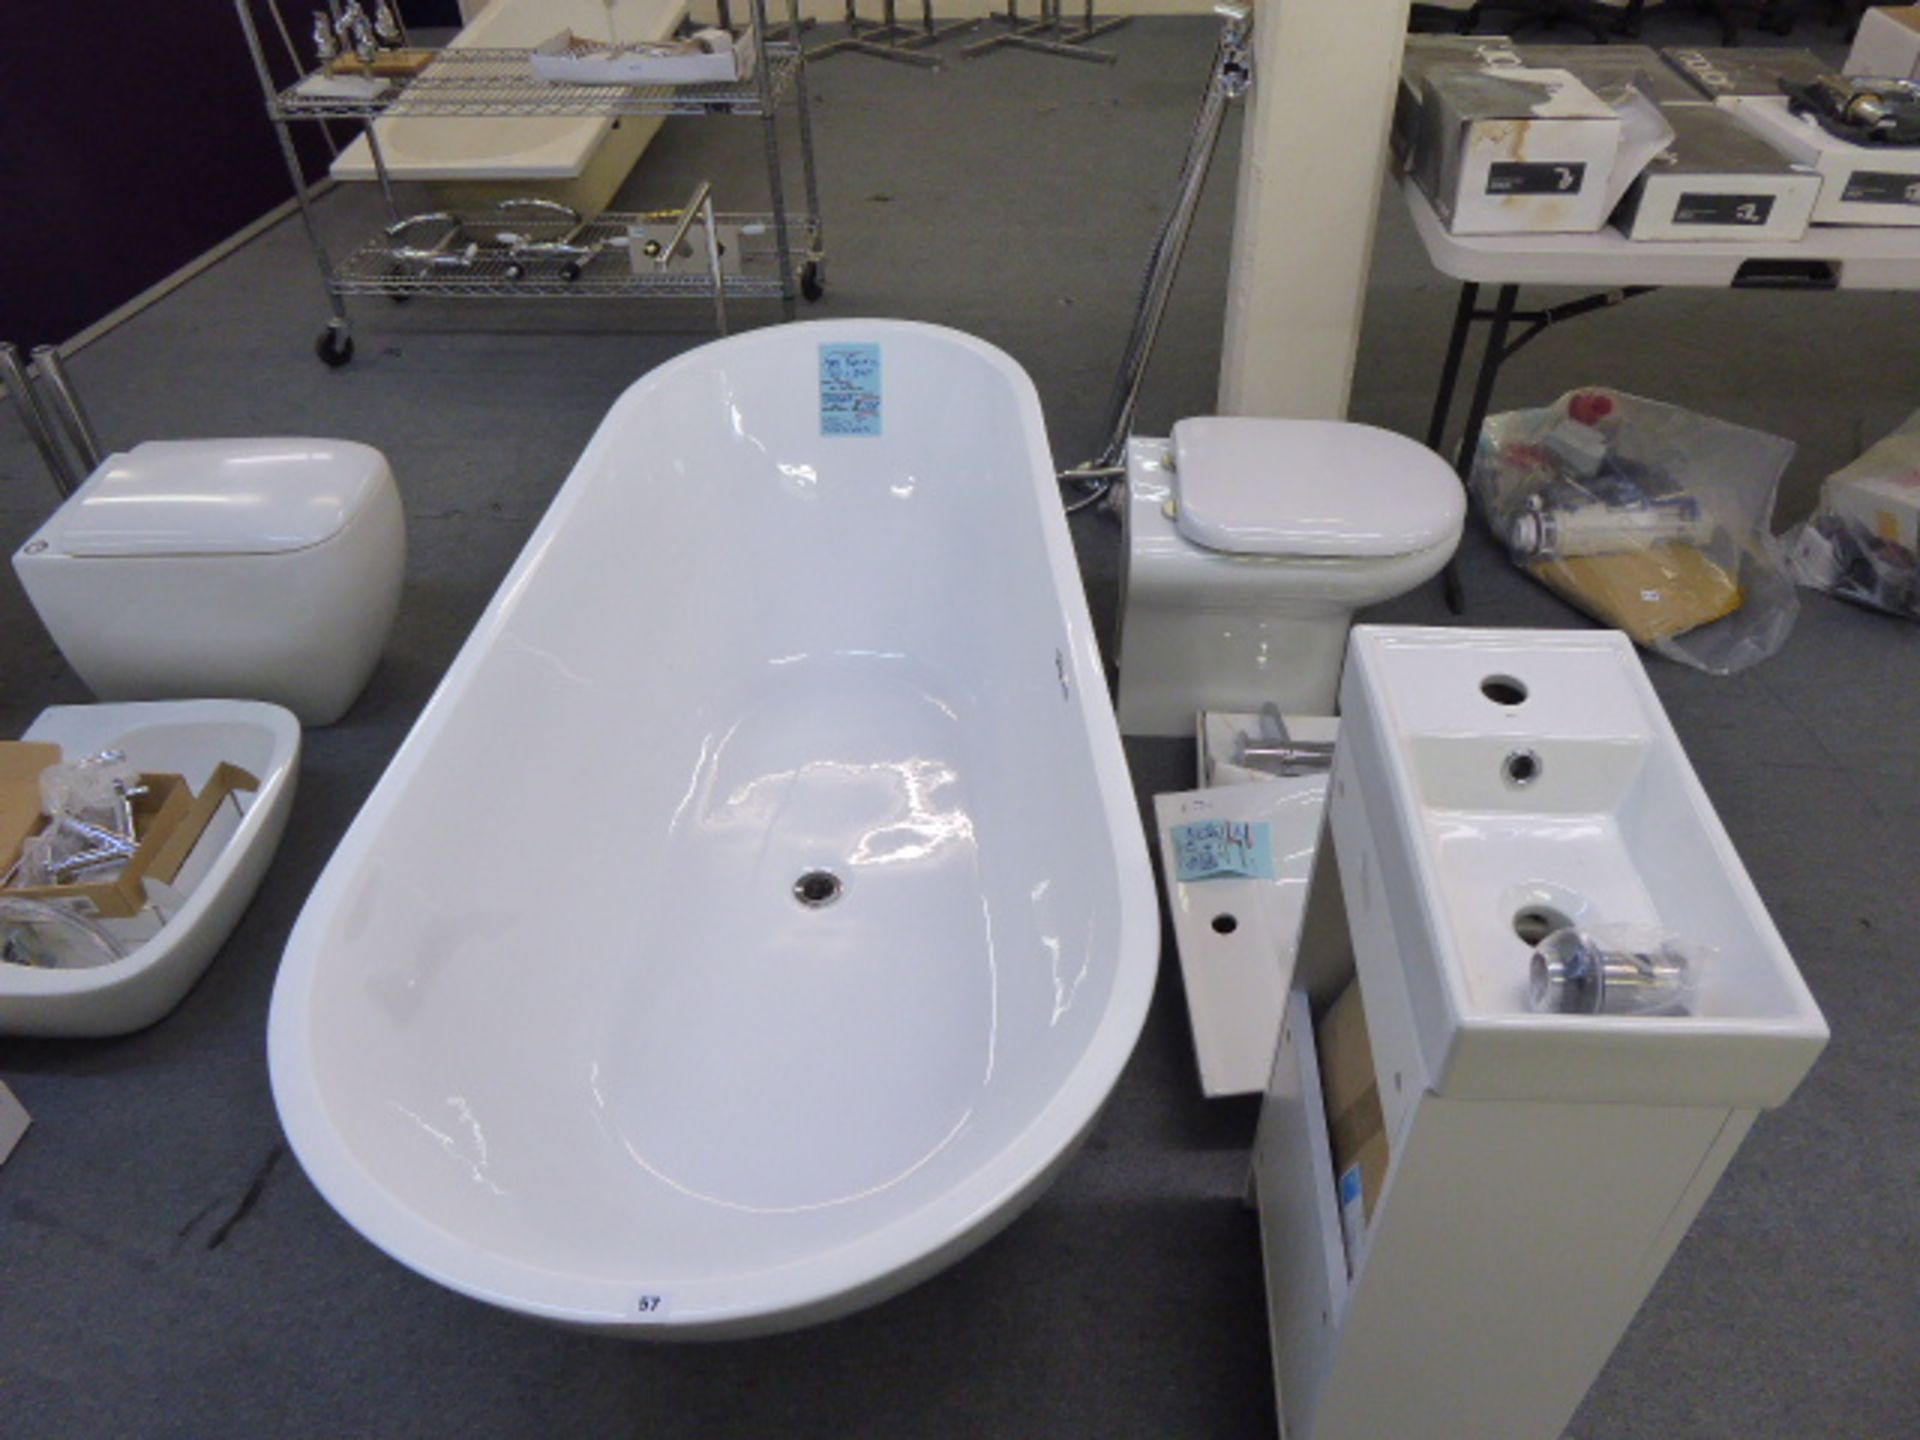 A Pacific white acrylic double skinned freestanding bath with upstand and waterfall tap, wash basin, - Image 3 of 3